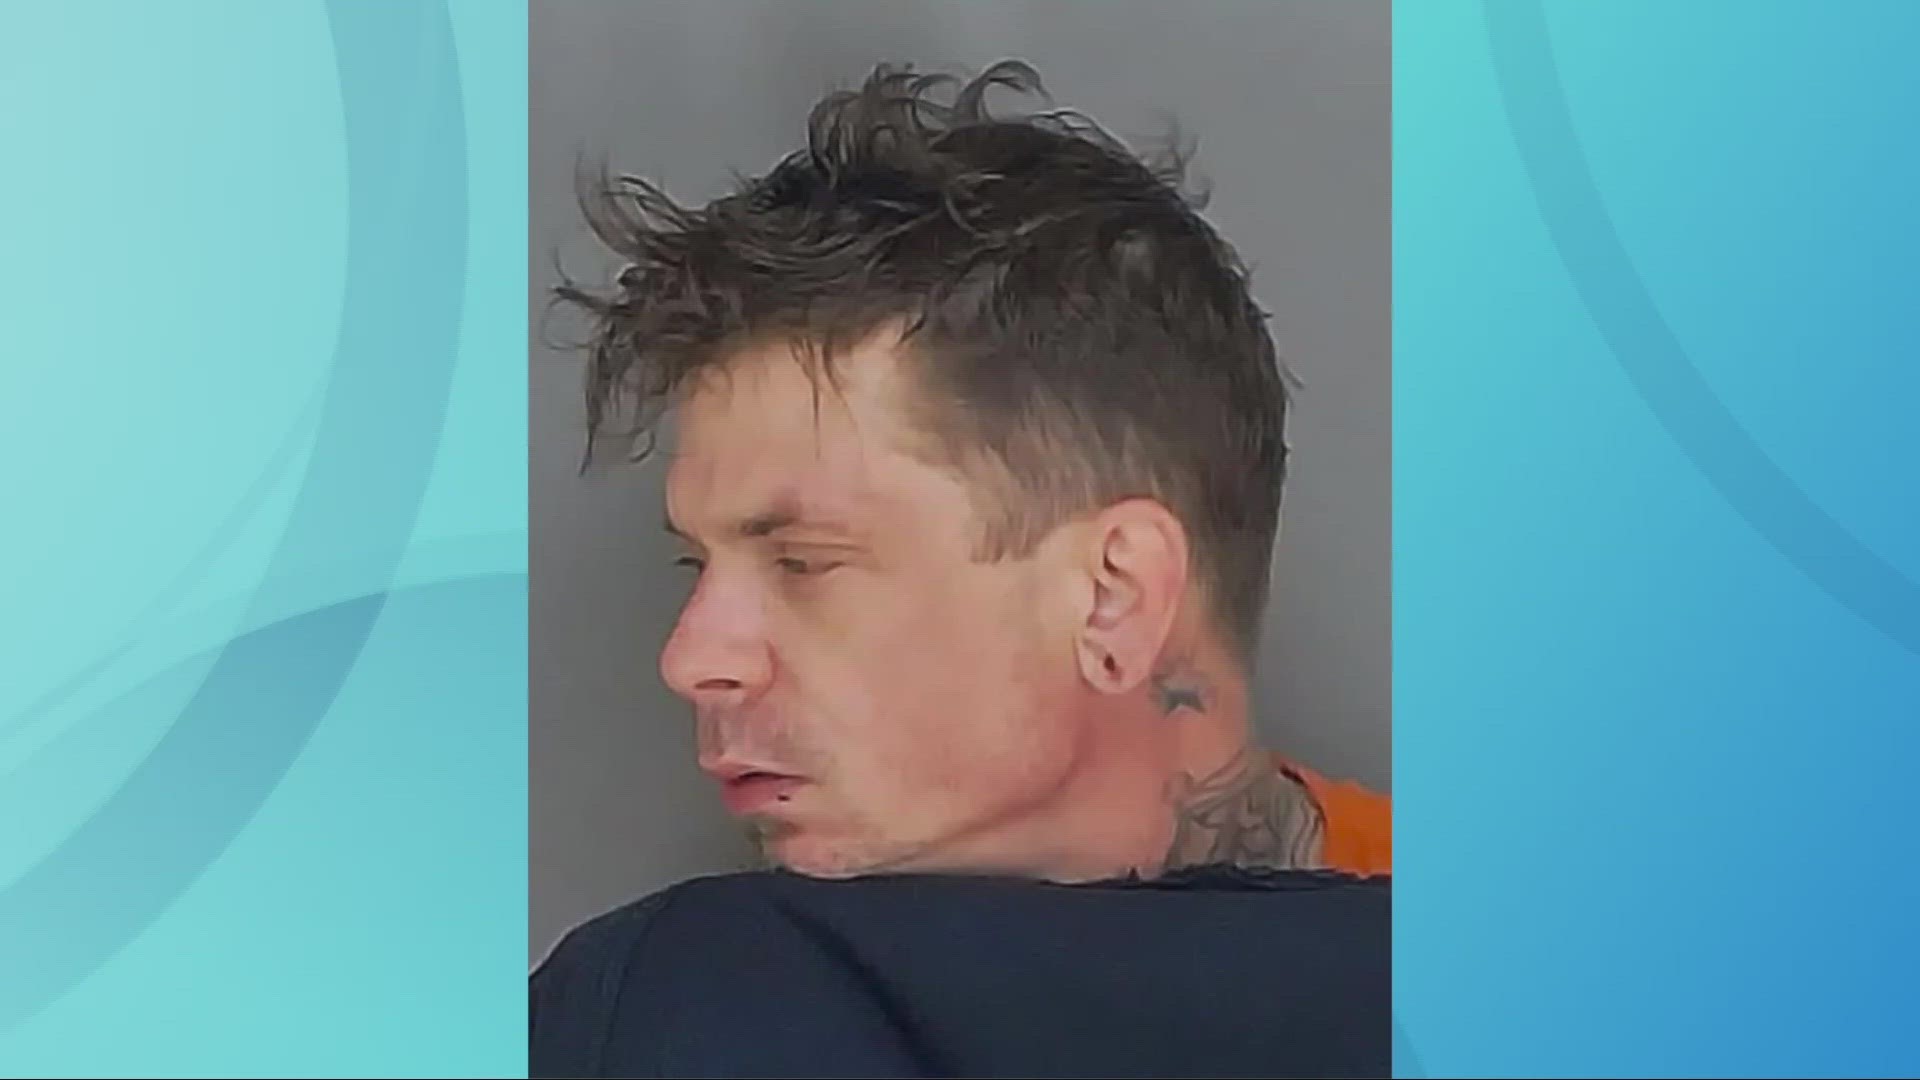 The Summit County Sheriff’s Office says the inmate has charges of willfully fleeing, possession of drugs, trafficking in drugs and a parole violation.